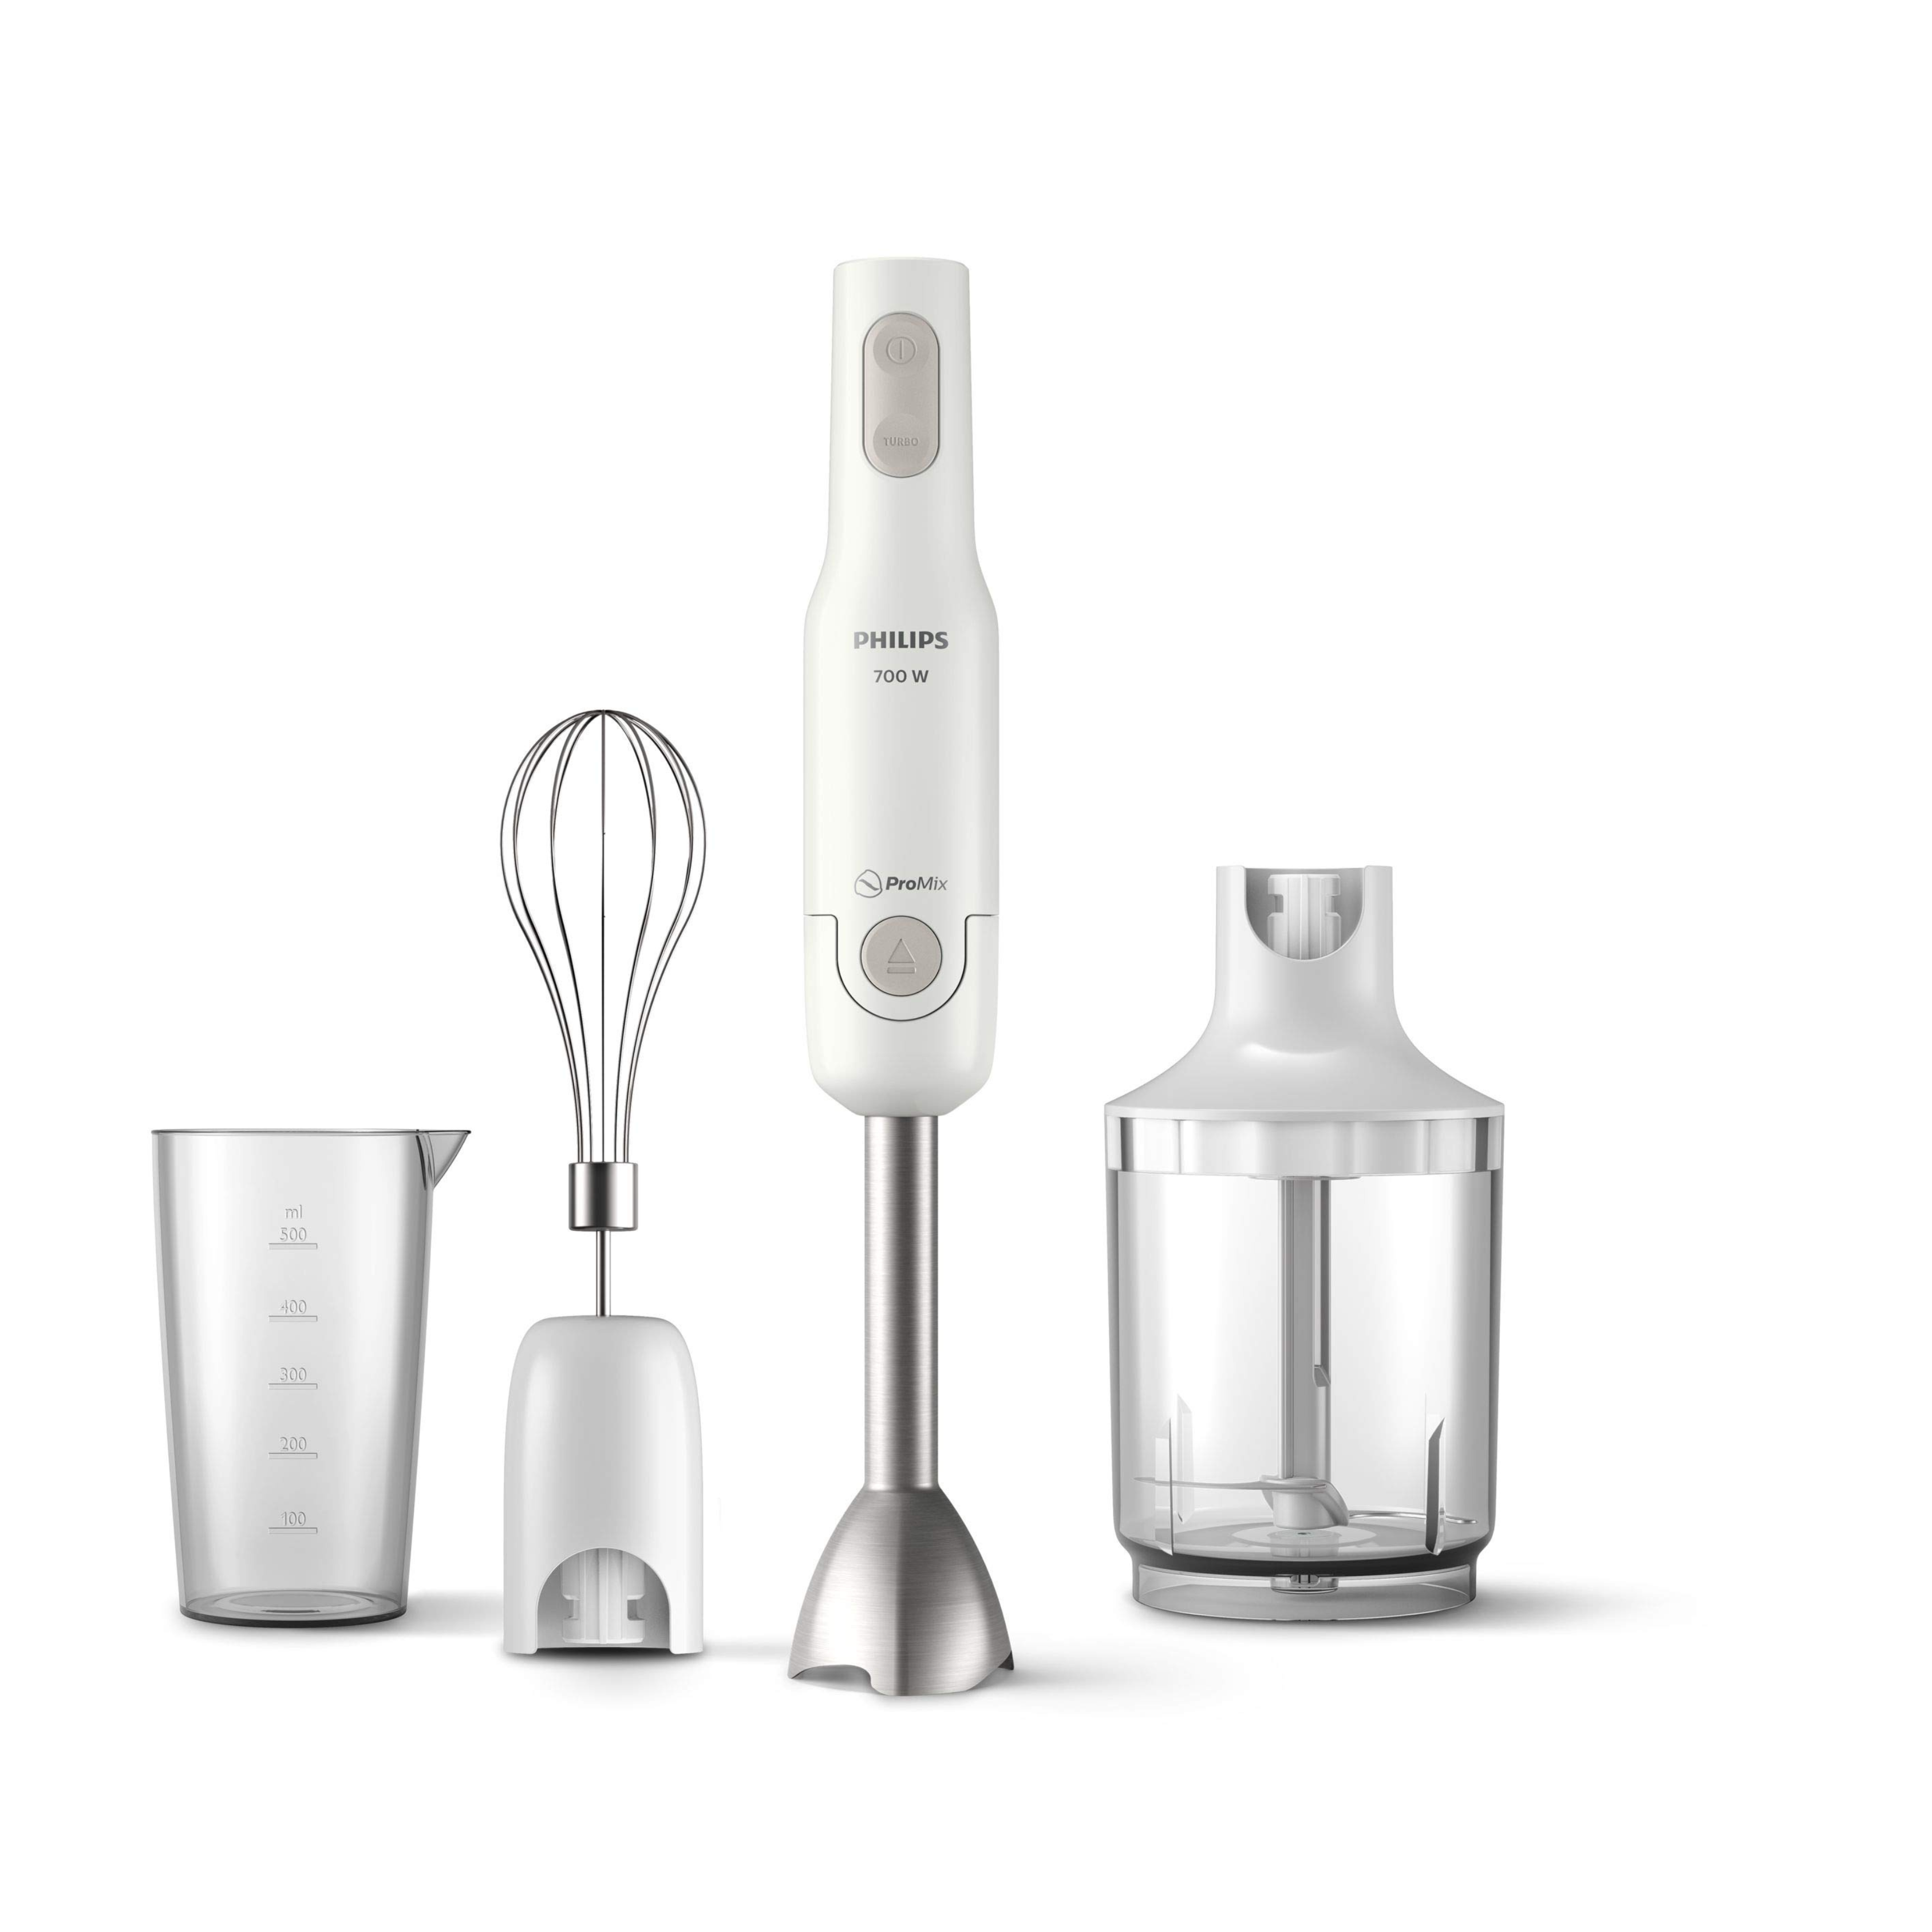 PHILIPS 700W With Metal Bar, Promix, 0.5L, XL Chopper, Whisk, White, 3-Pin Hr2545/01.